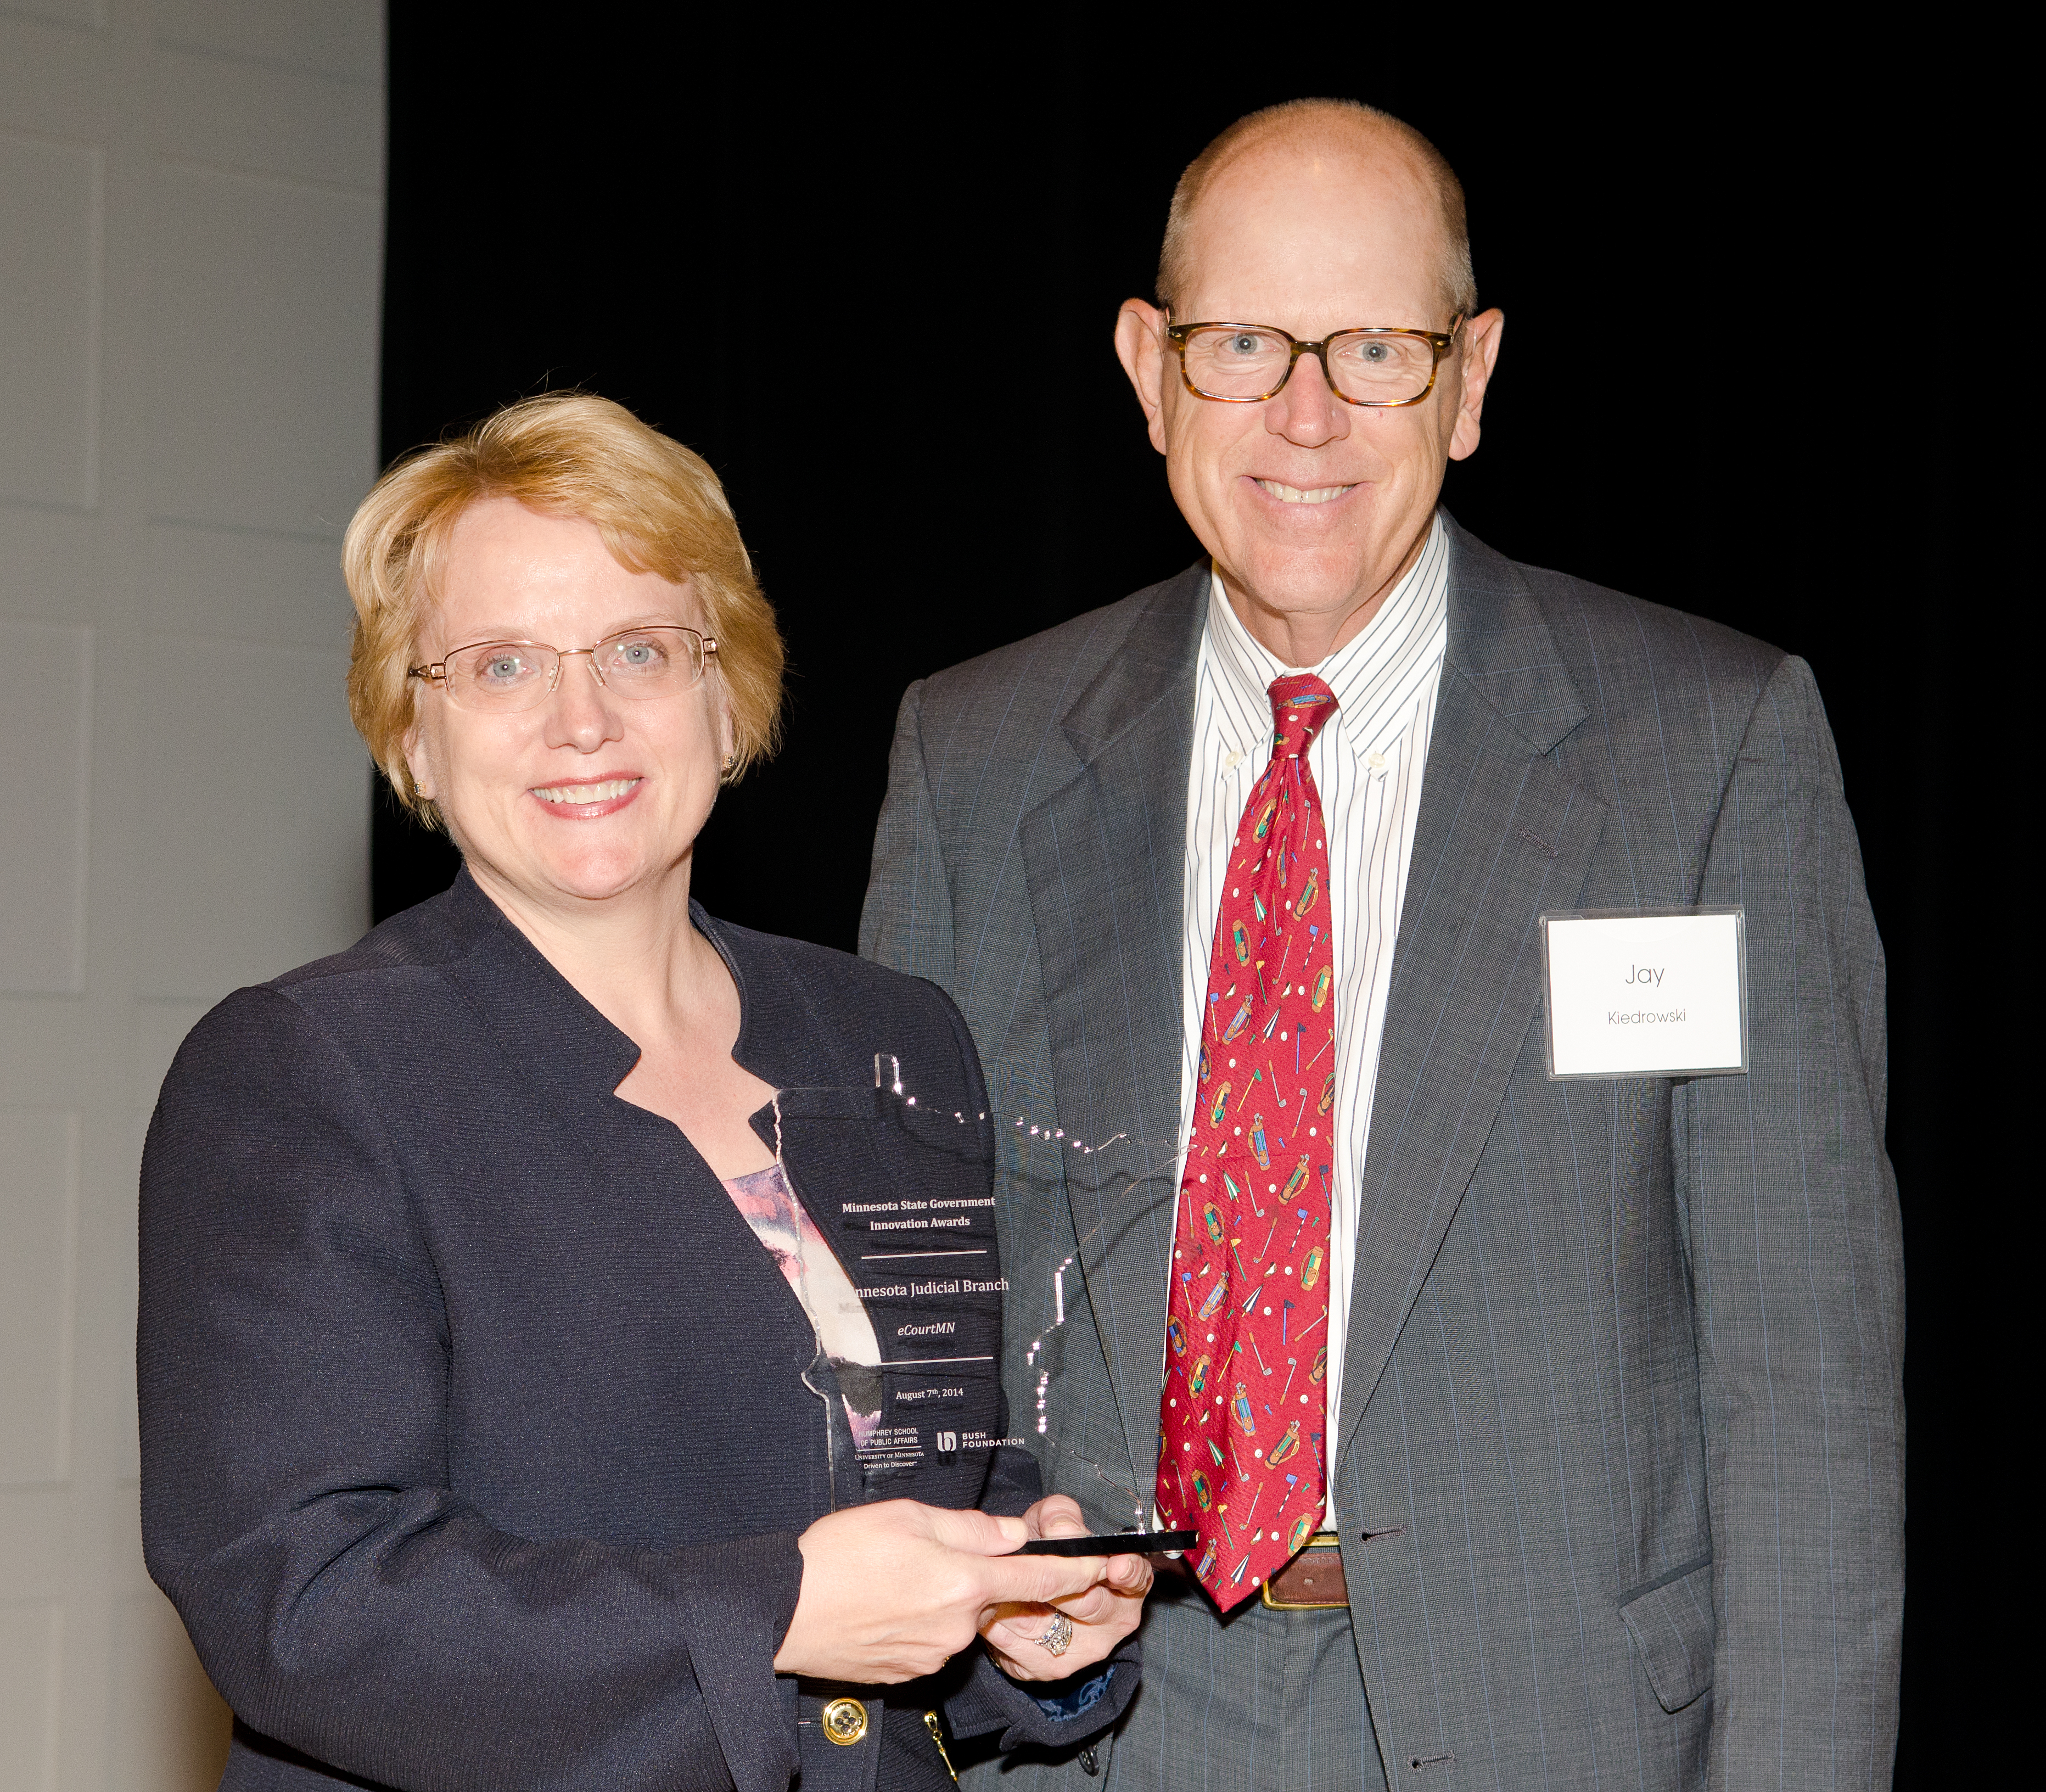 Chief Justice Gildea accepts a 2014 State Government Innovation award for the Minnesota Jusicial Branch's eCourtMN Initiative